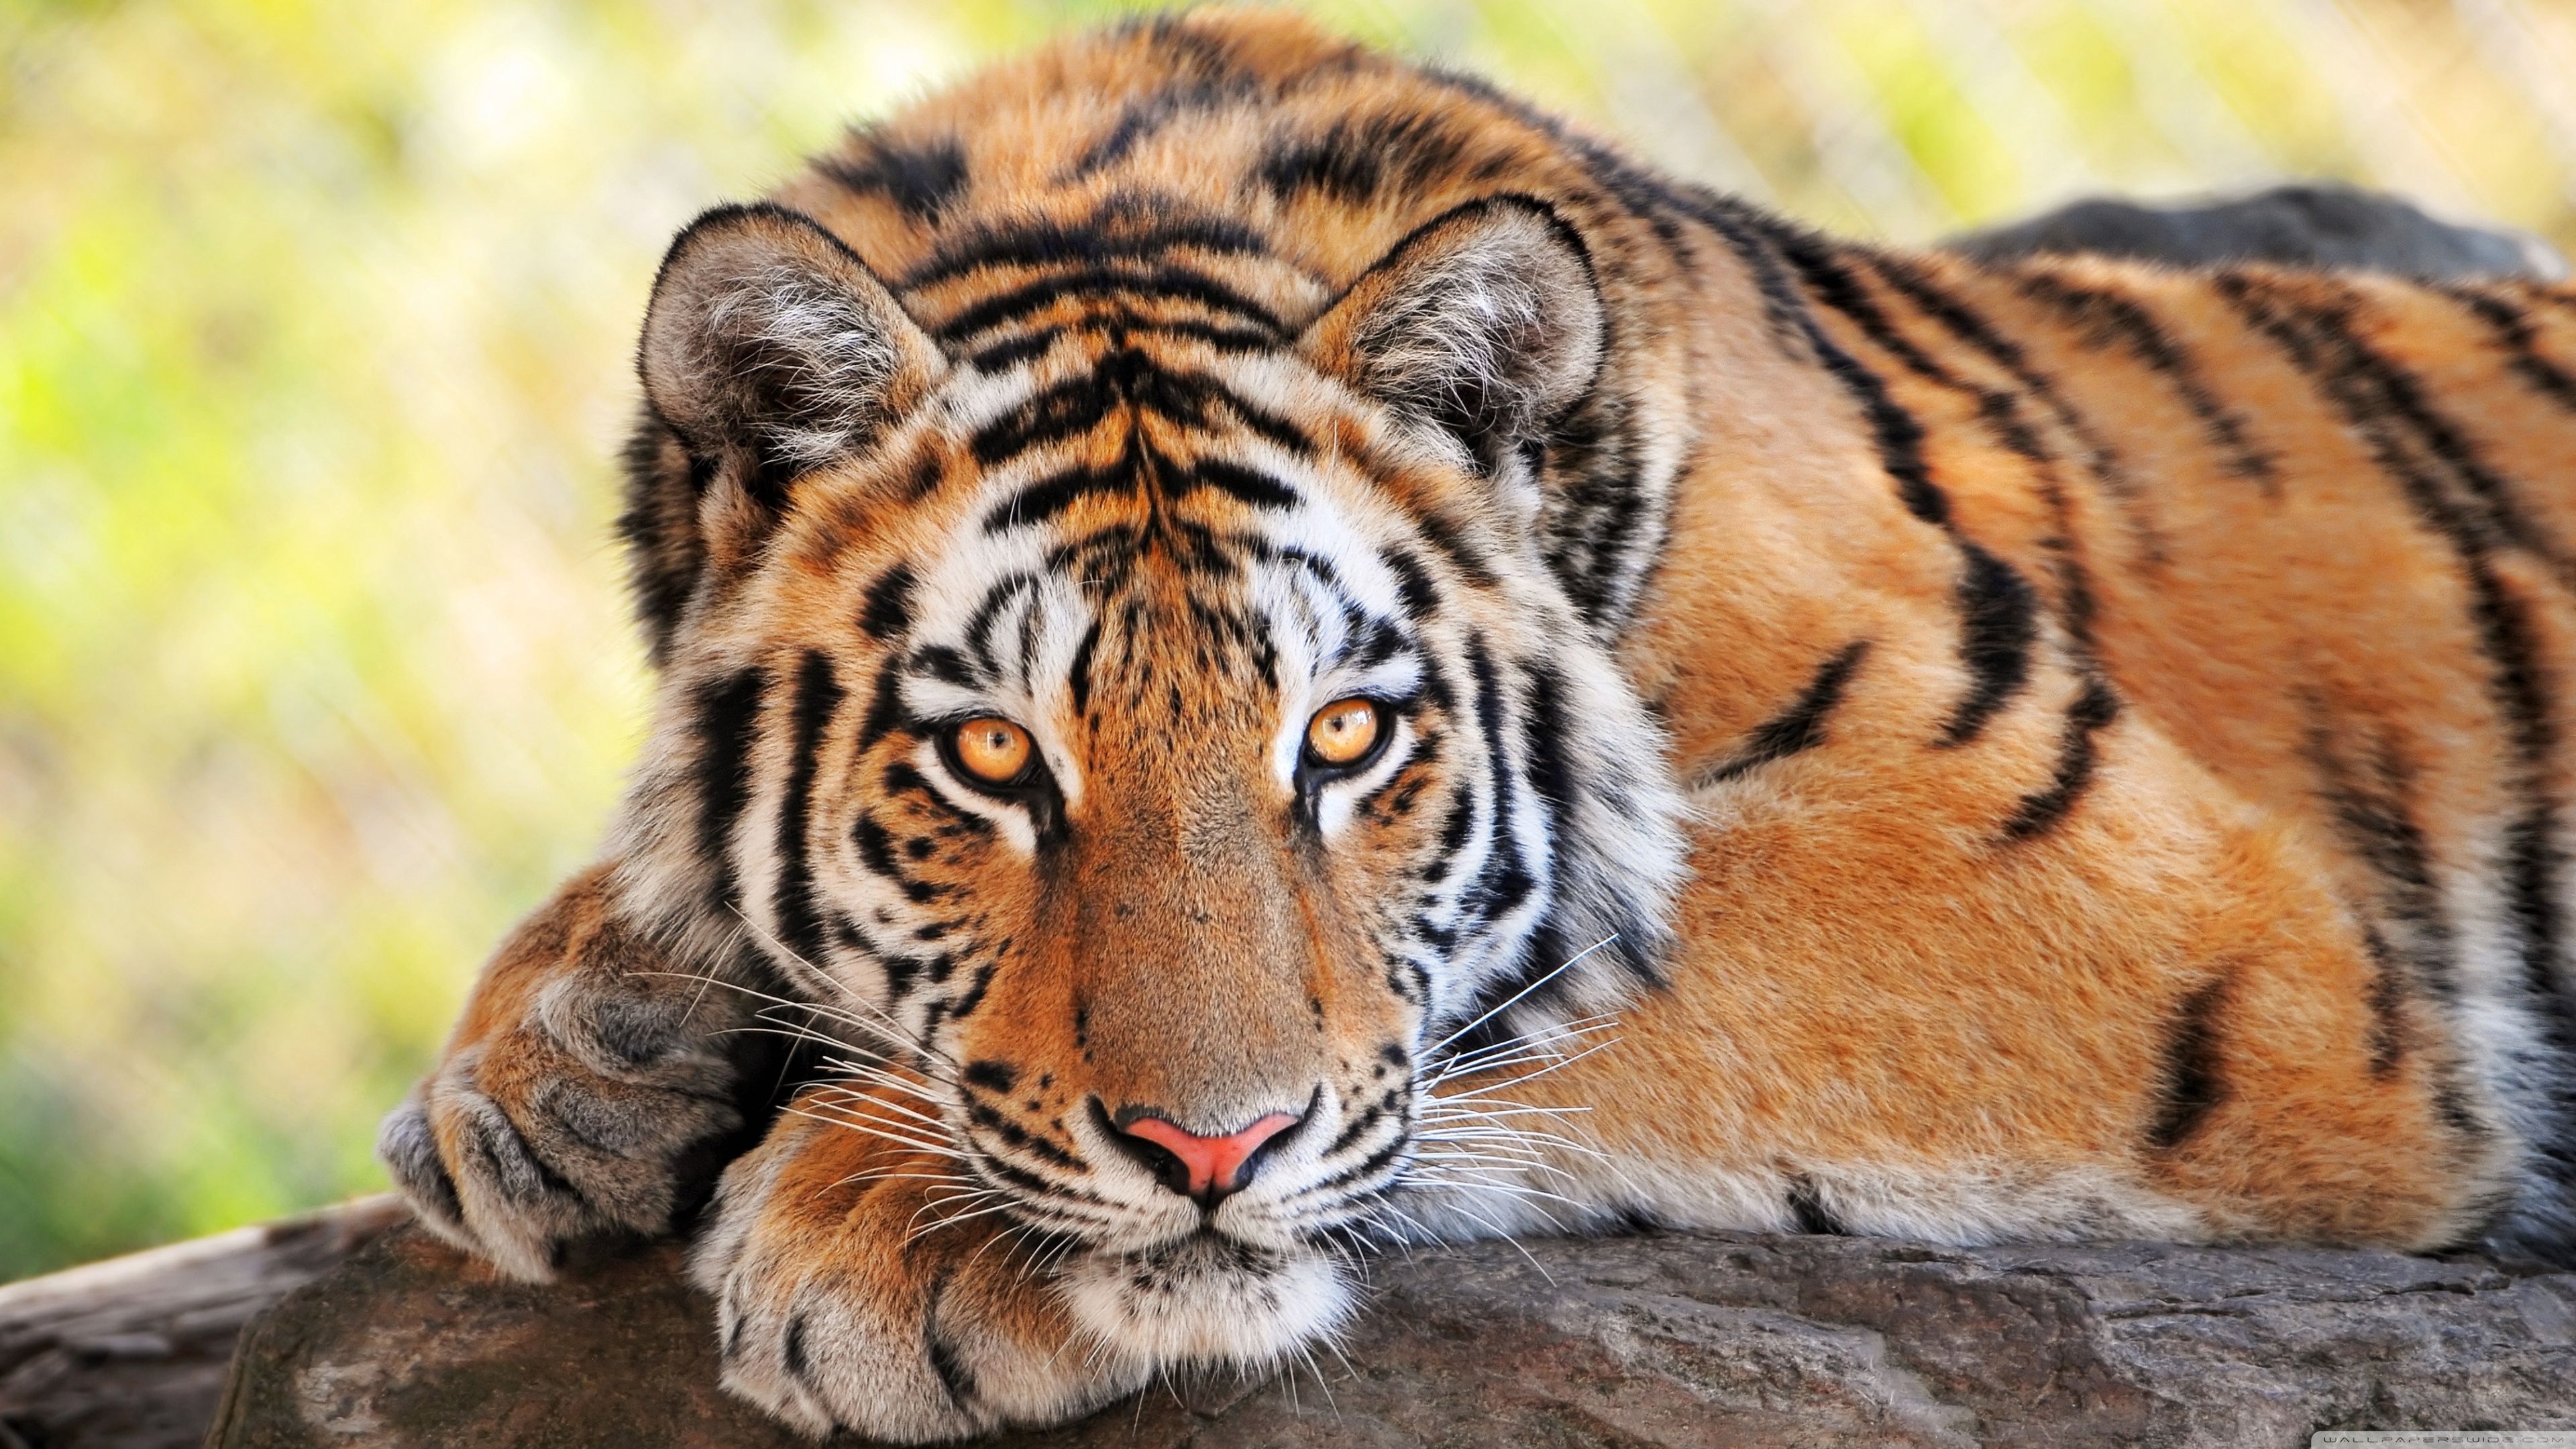 Some of my favorite wildlife and animal picture. Big cats, Tiger wallpaper, Save the tiger